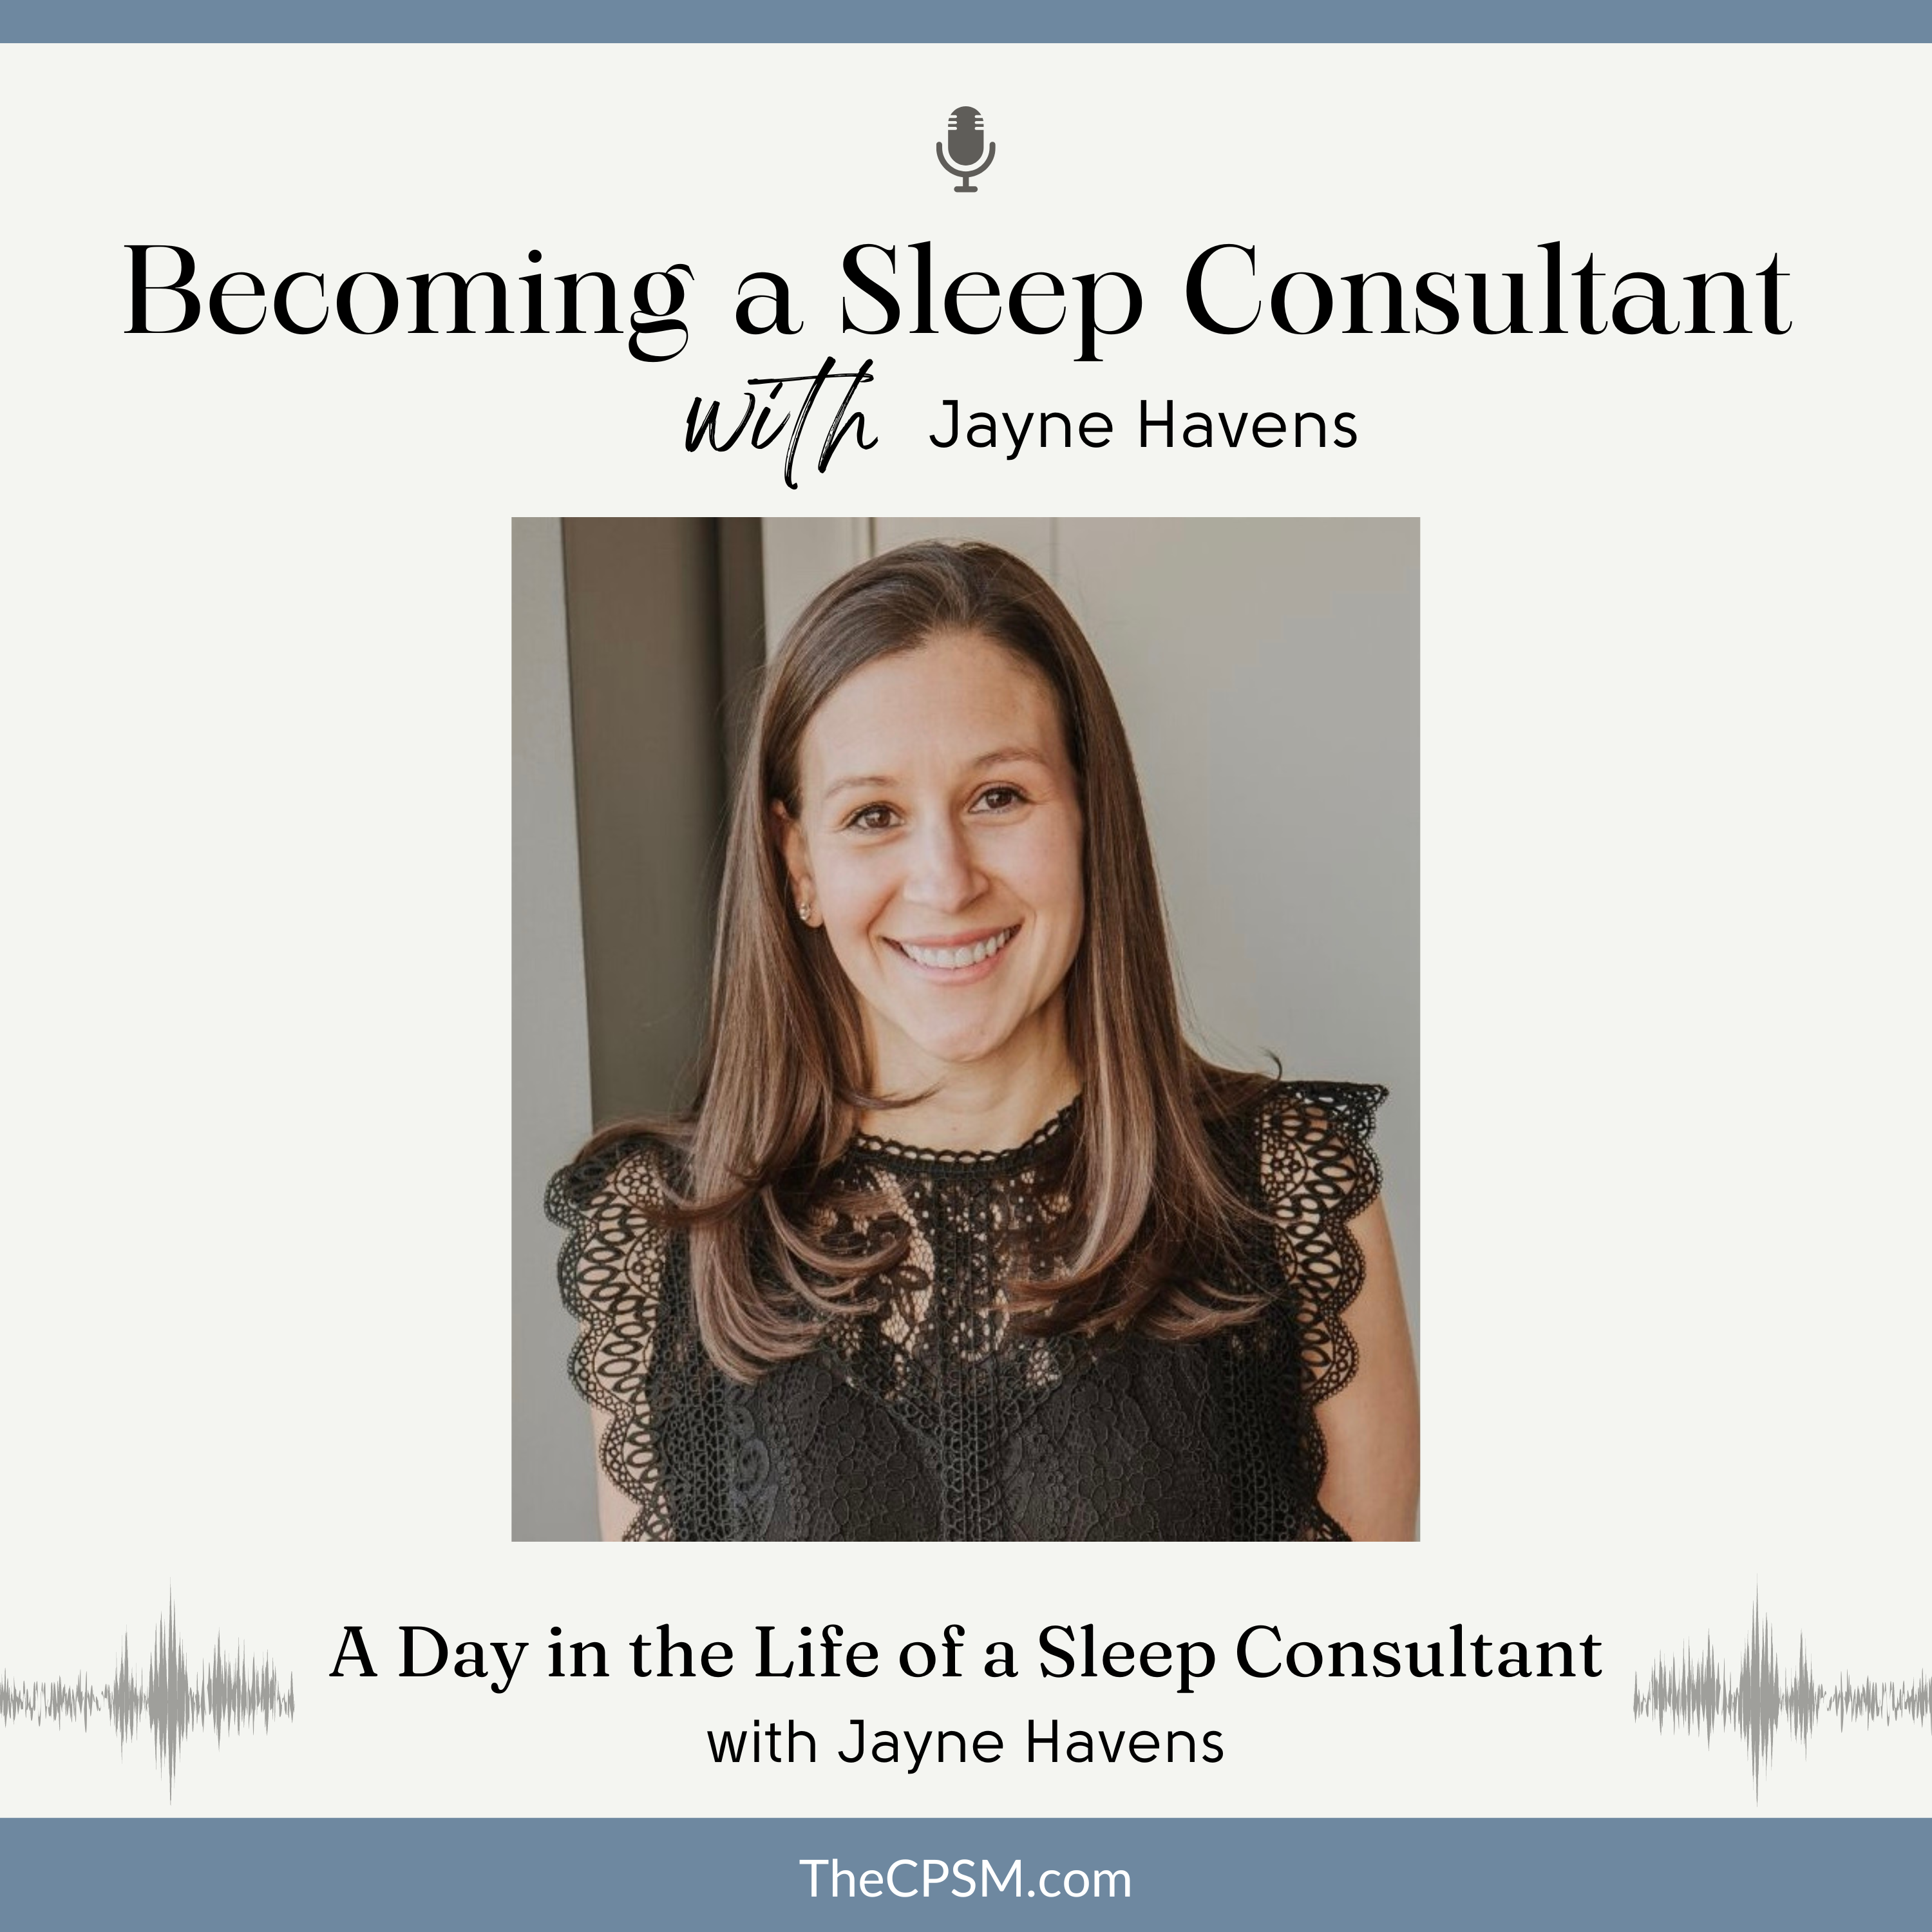 A Day in the Life of a Sleep Consultant